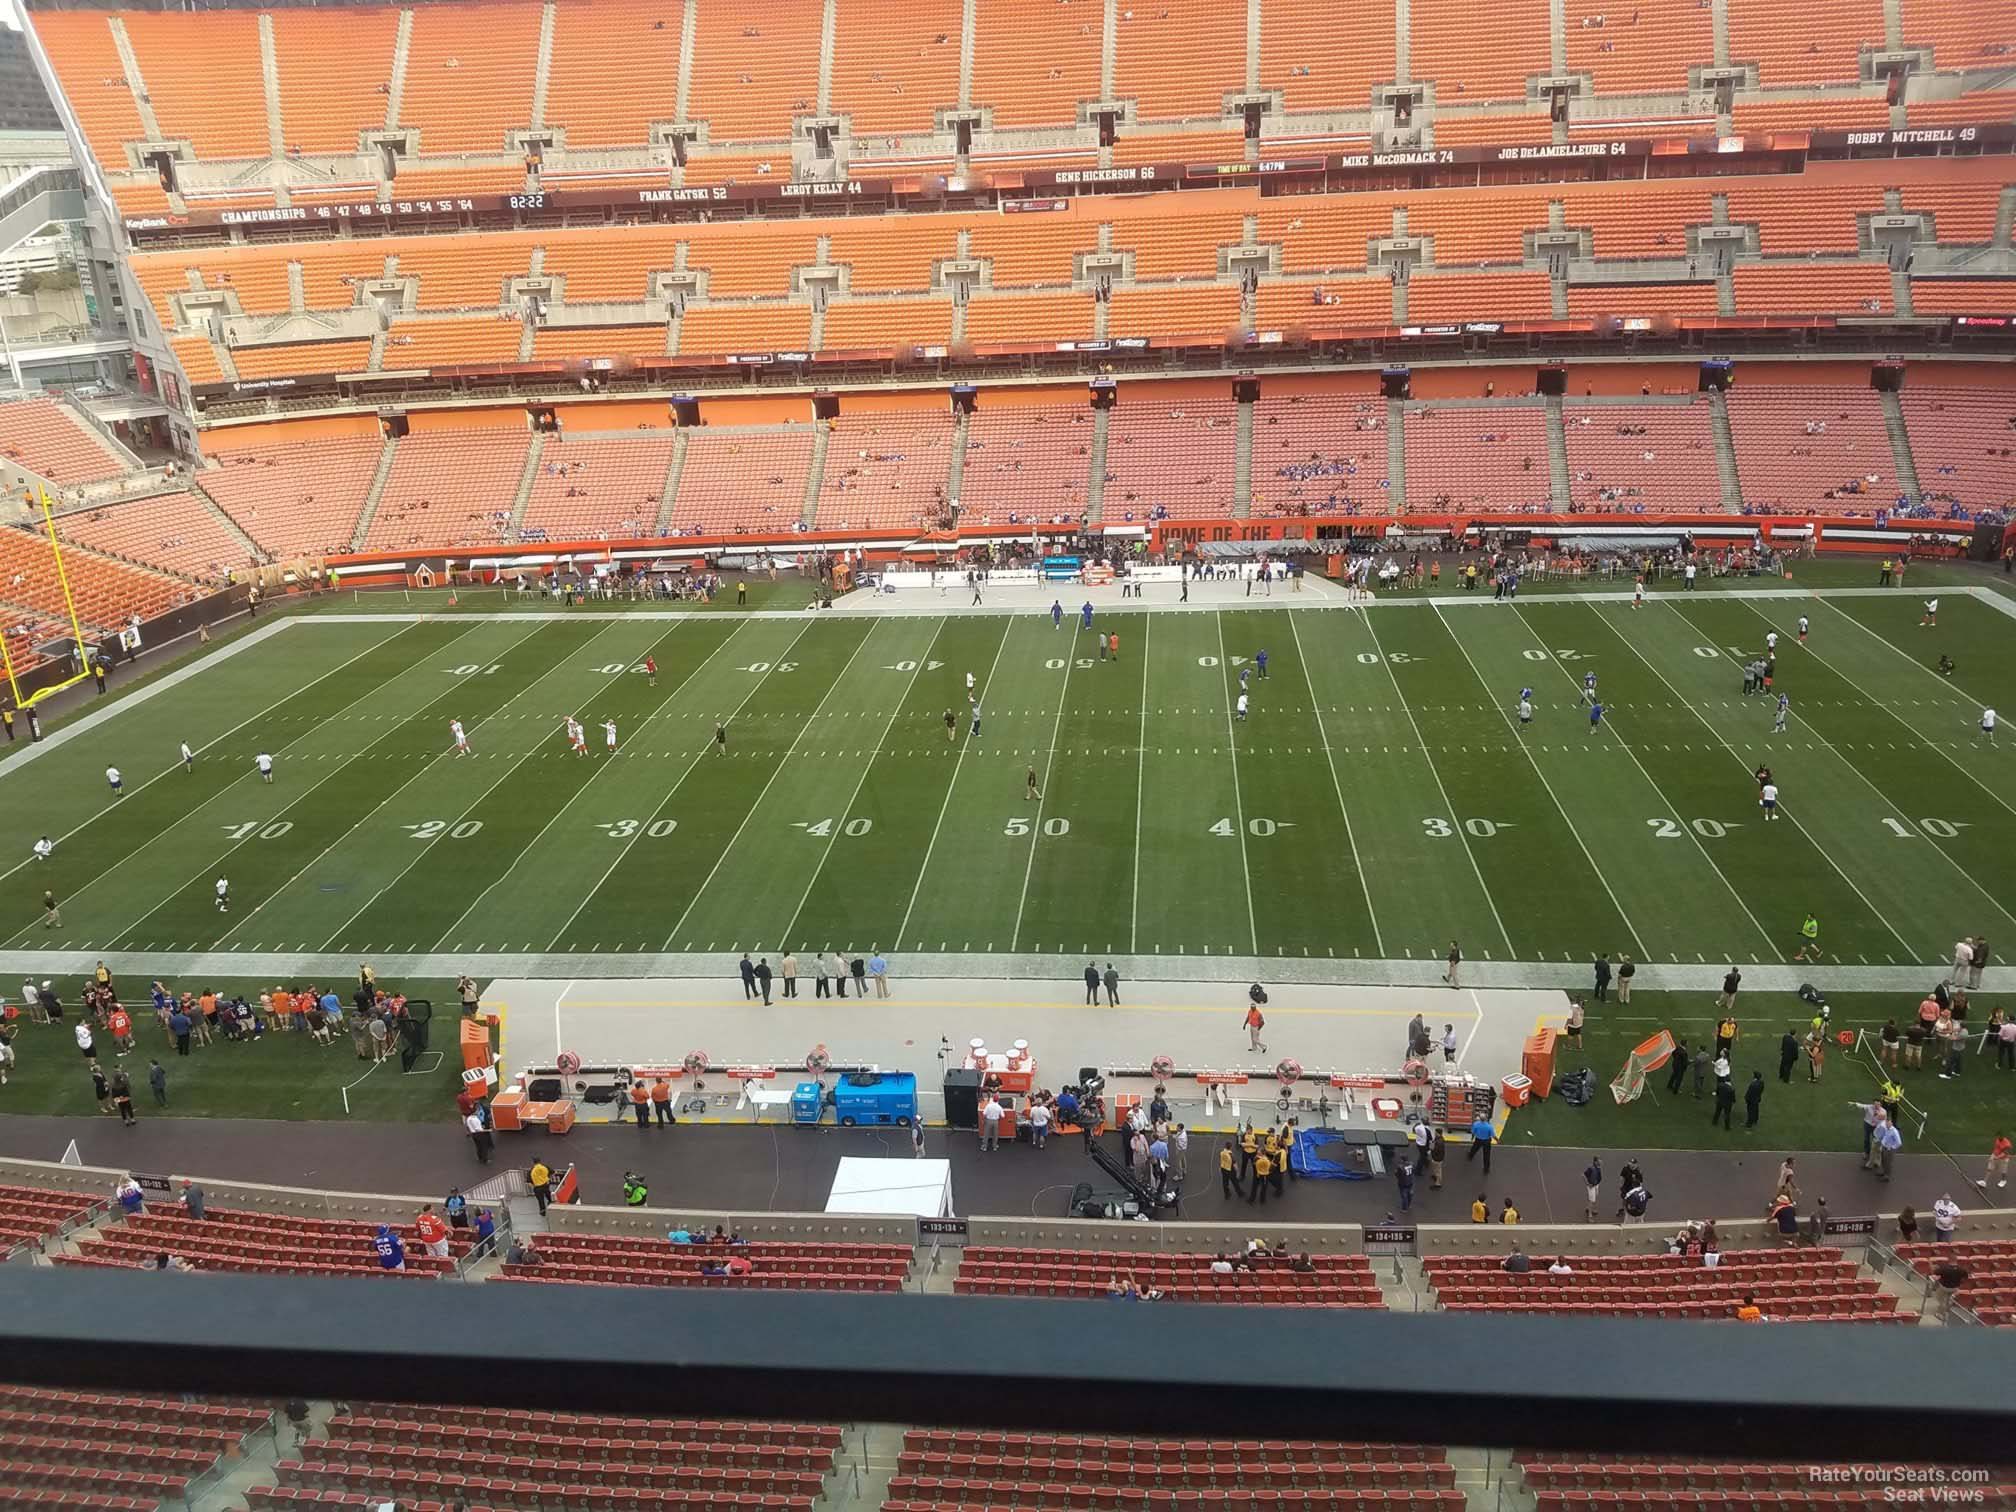 section 534, row 2 seat view  - cleveland browns stadium